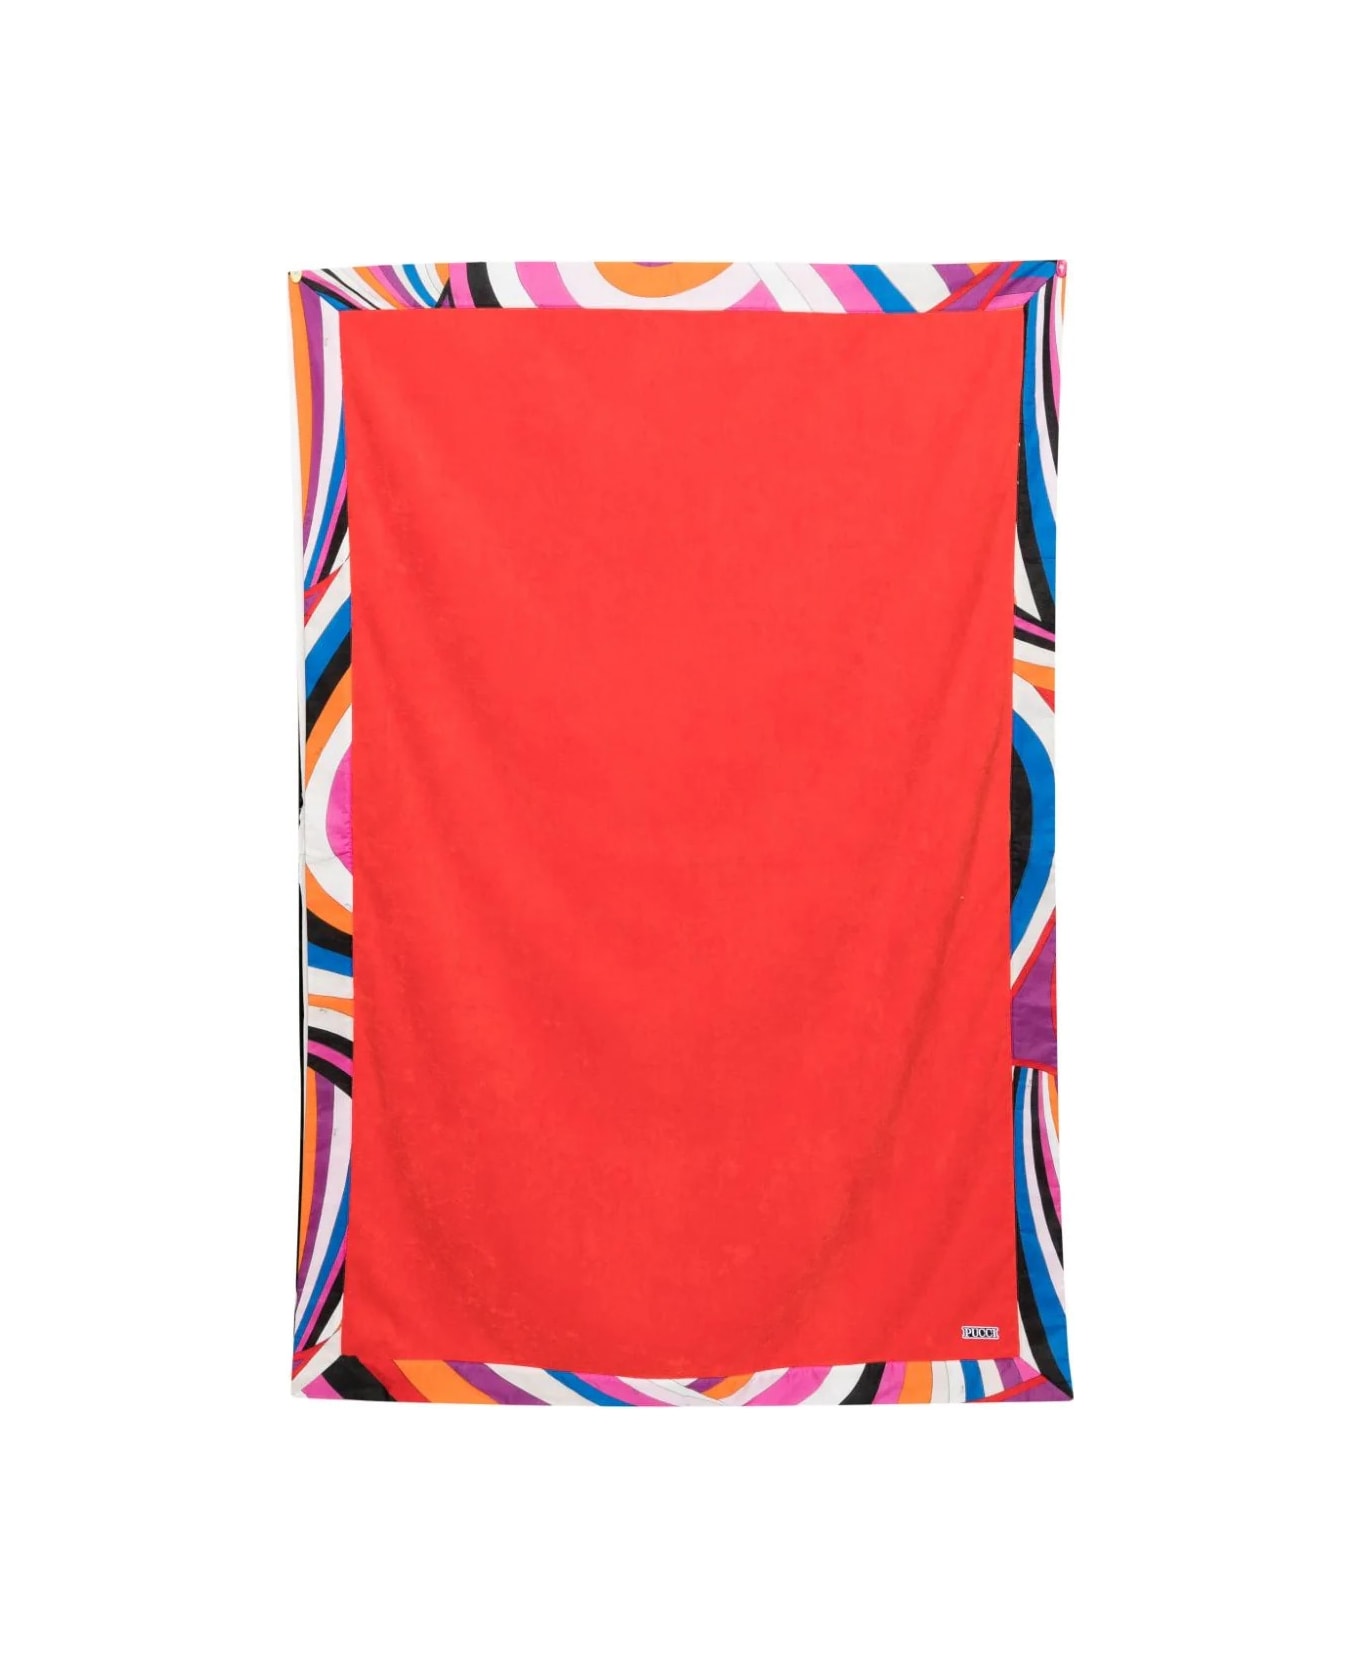 Pucci Red Beach Towel With Iride Print Border - Red アクセサリー＆ギフト